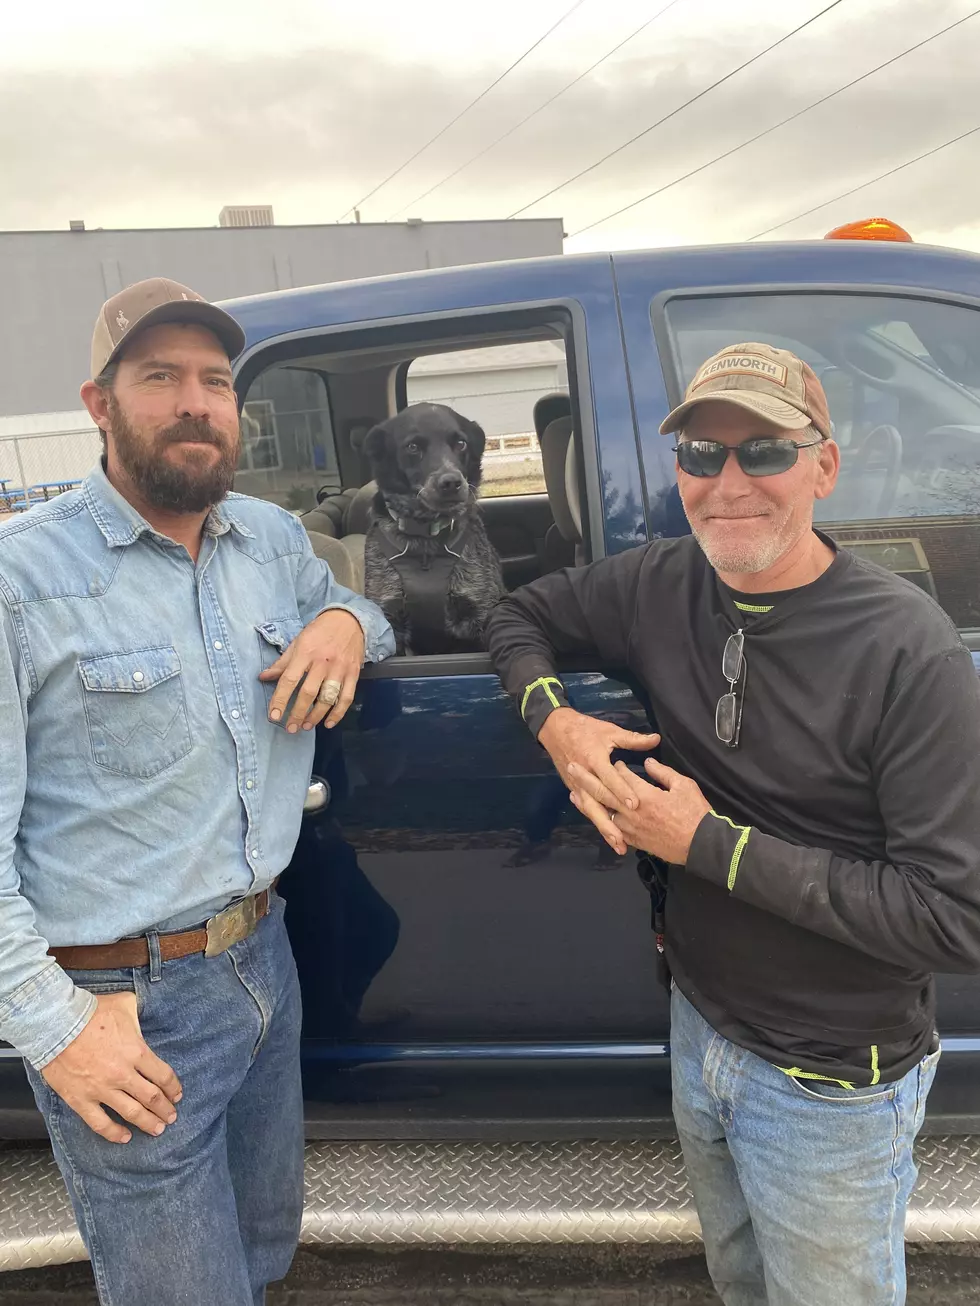 Dog Lost In Wyoming Mountains For 3 Days Reunited With Owner